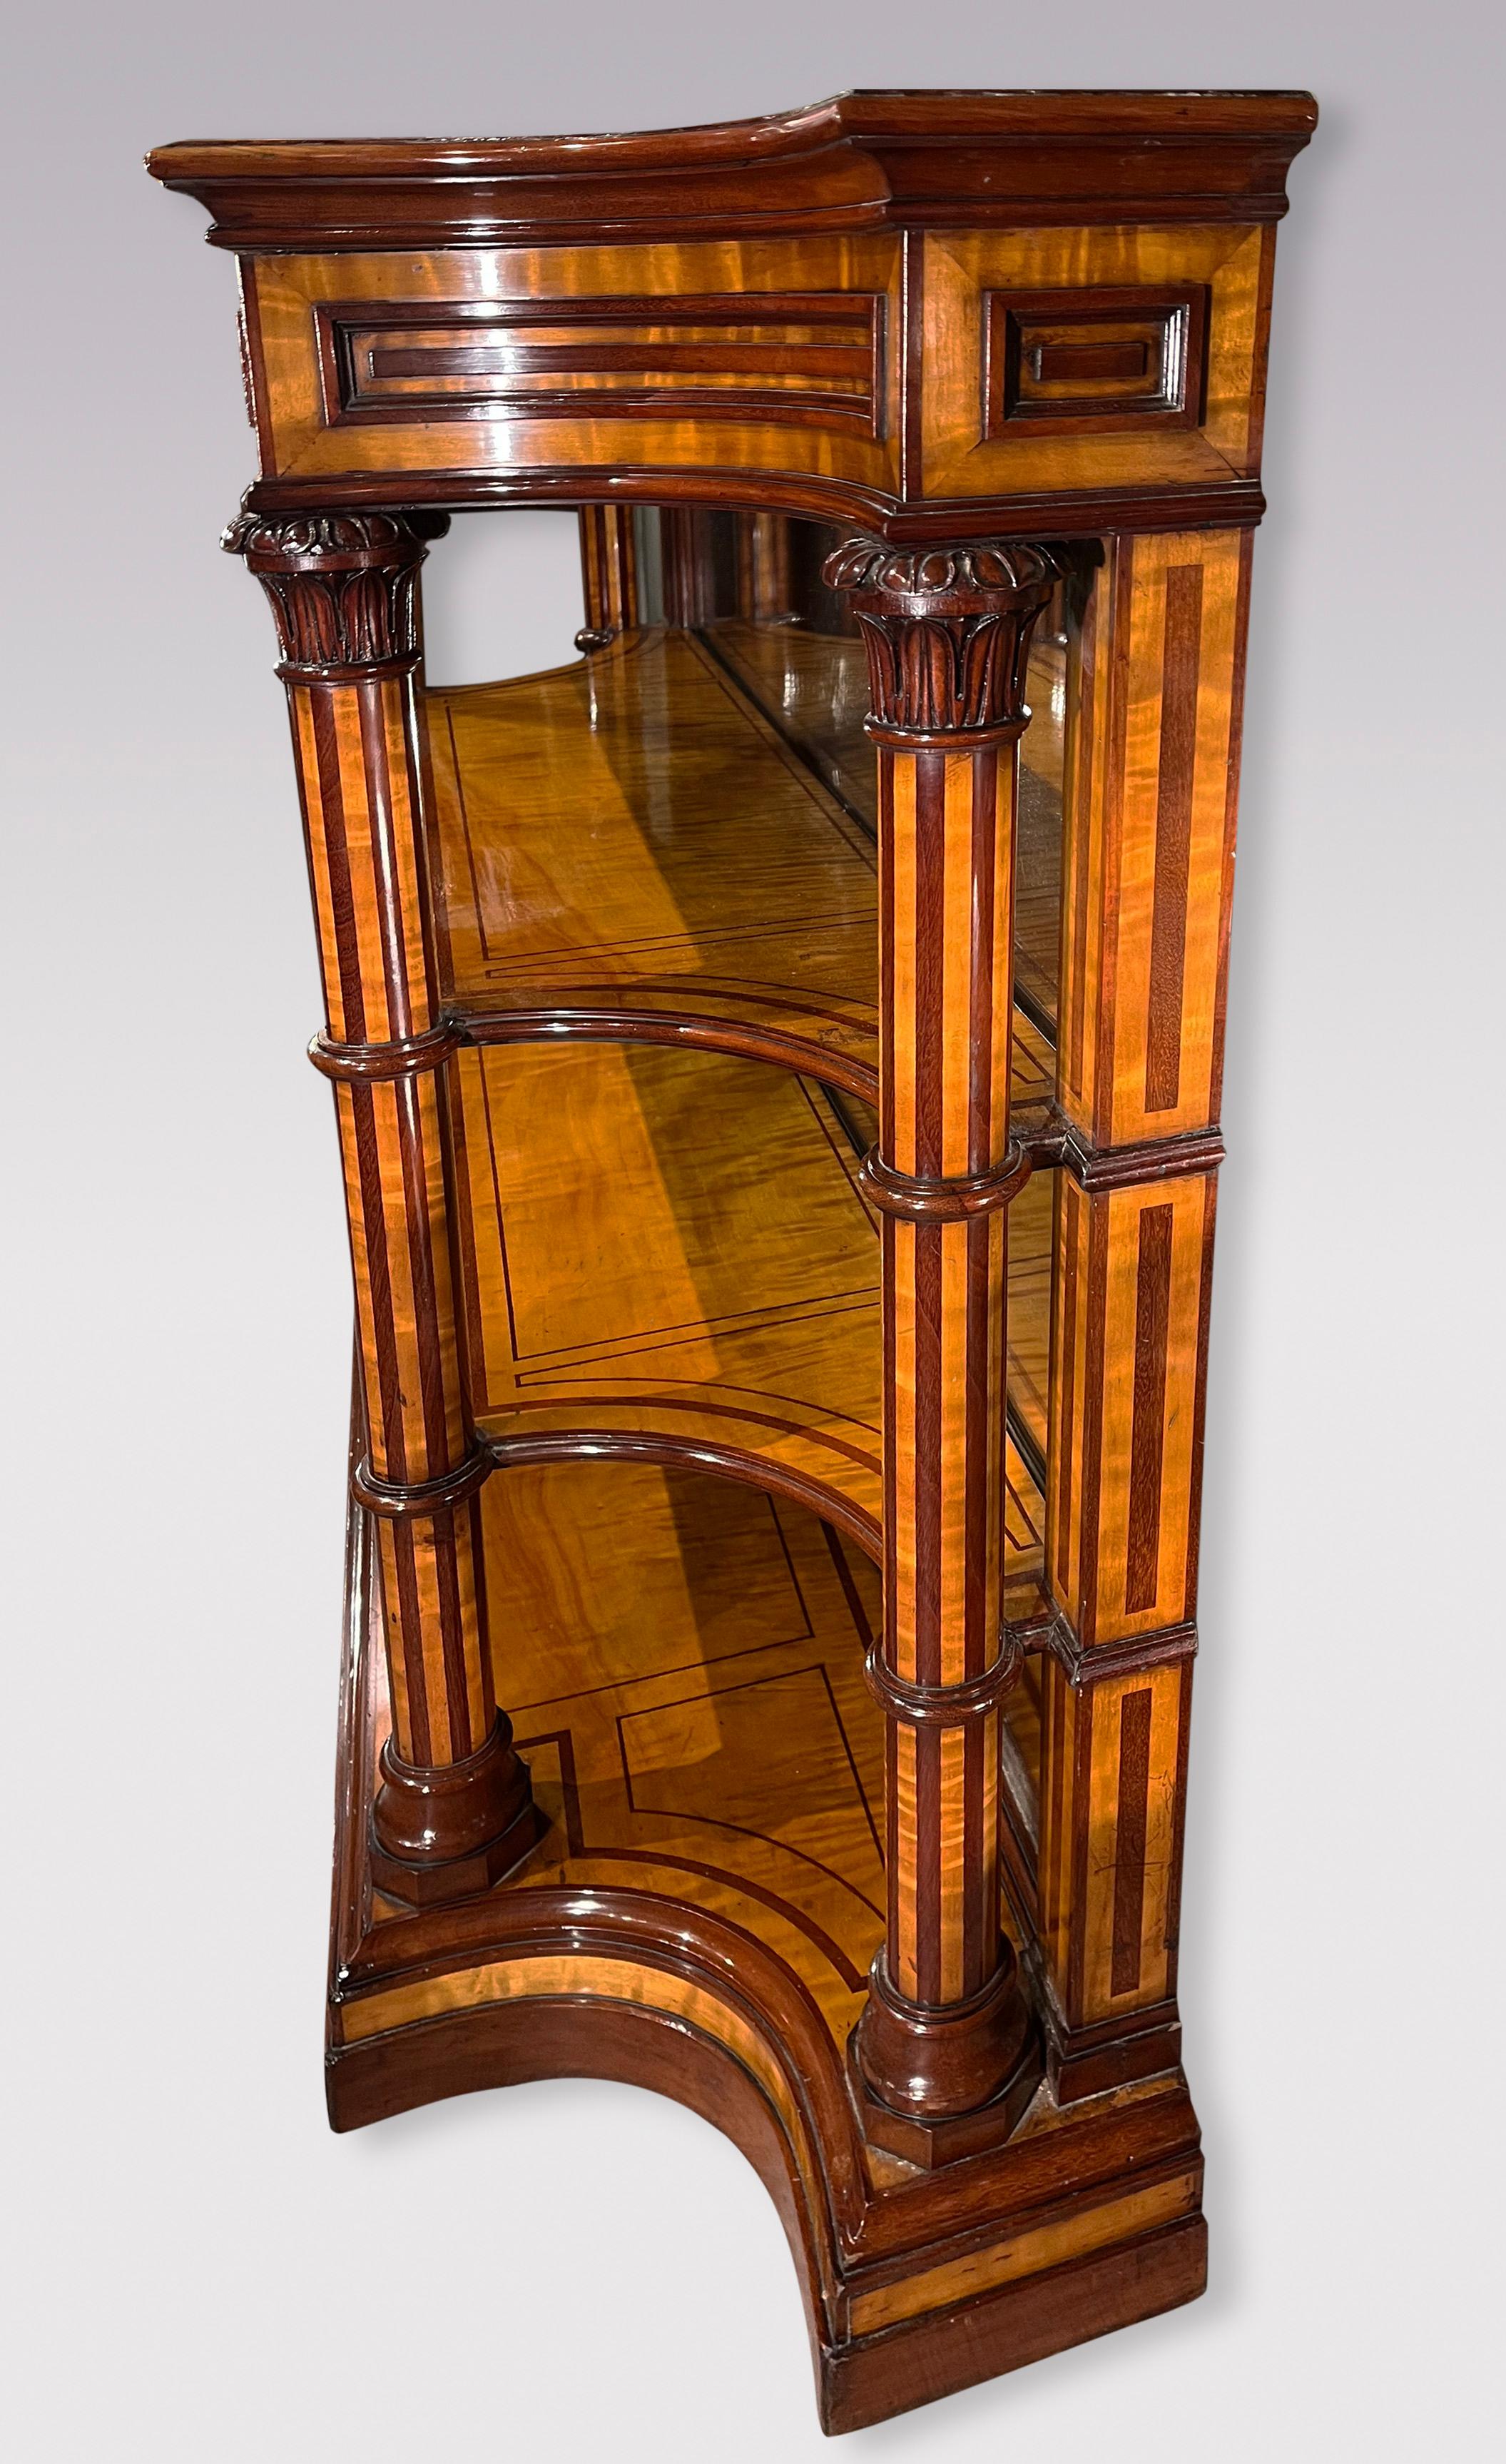 19th Century A rare pair of early 19th century satinwood and purpleheart open bookcases